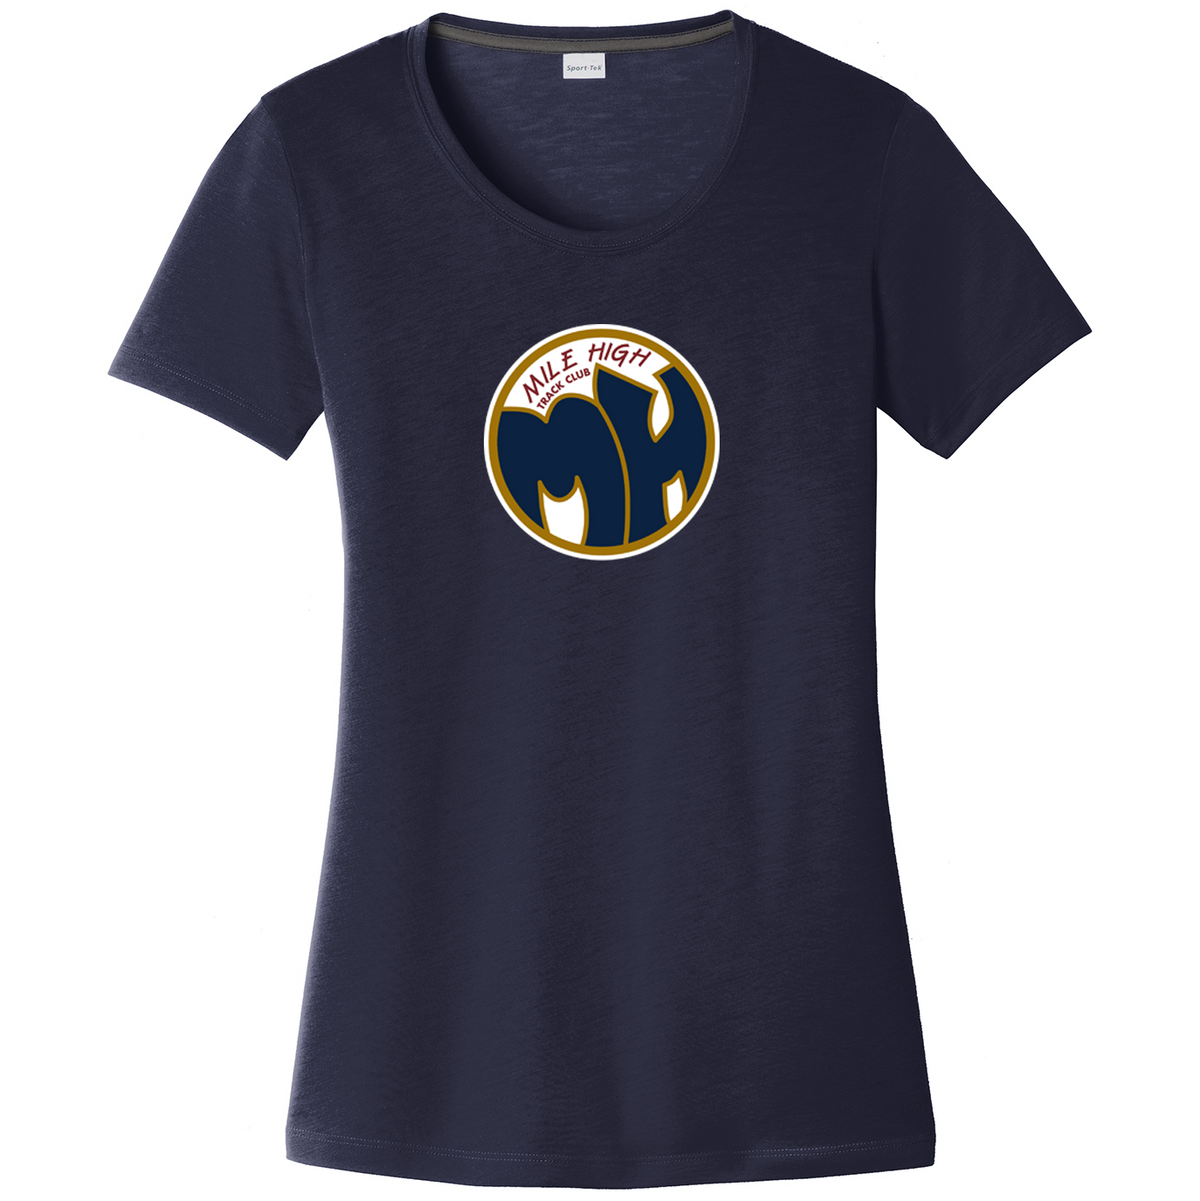 Mile High Track Women's CottonTouch Performance T-Shirt